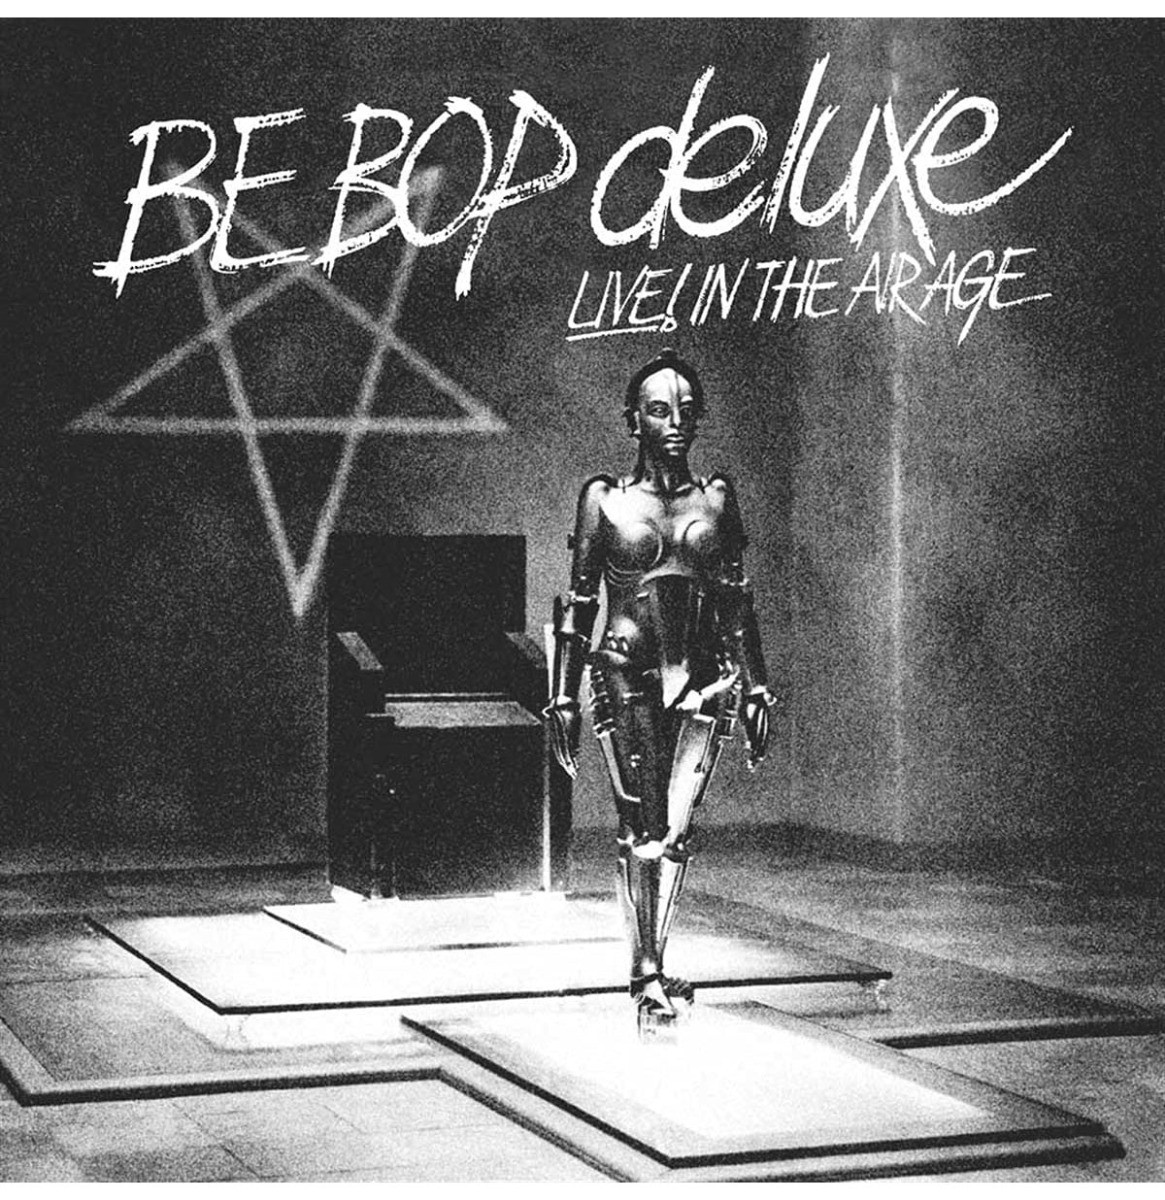 Be Bop Deluxe - Live! In The Air Age (Record Store Day 2022) 3LP